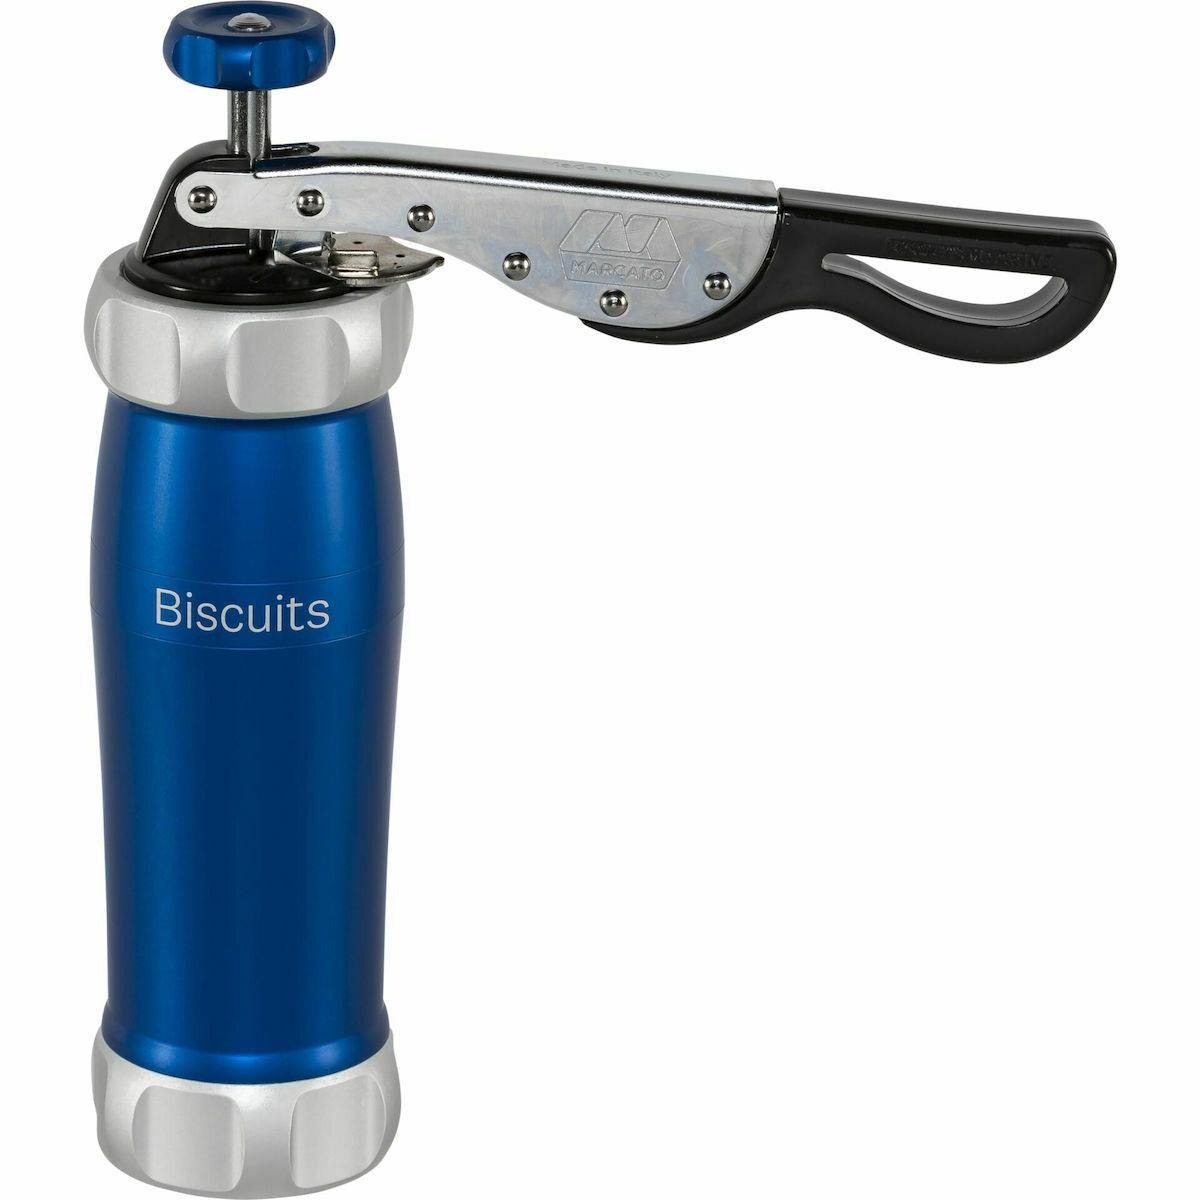 Marcato Atlas Deluxe Biscuit Maker Cookie Press, Made in Italy, Includes 20 Disc Shapes, blue